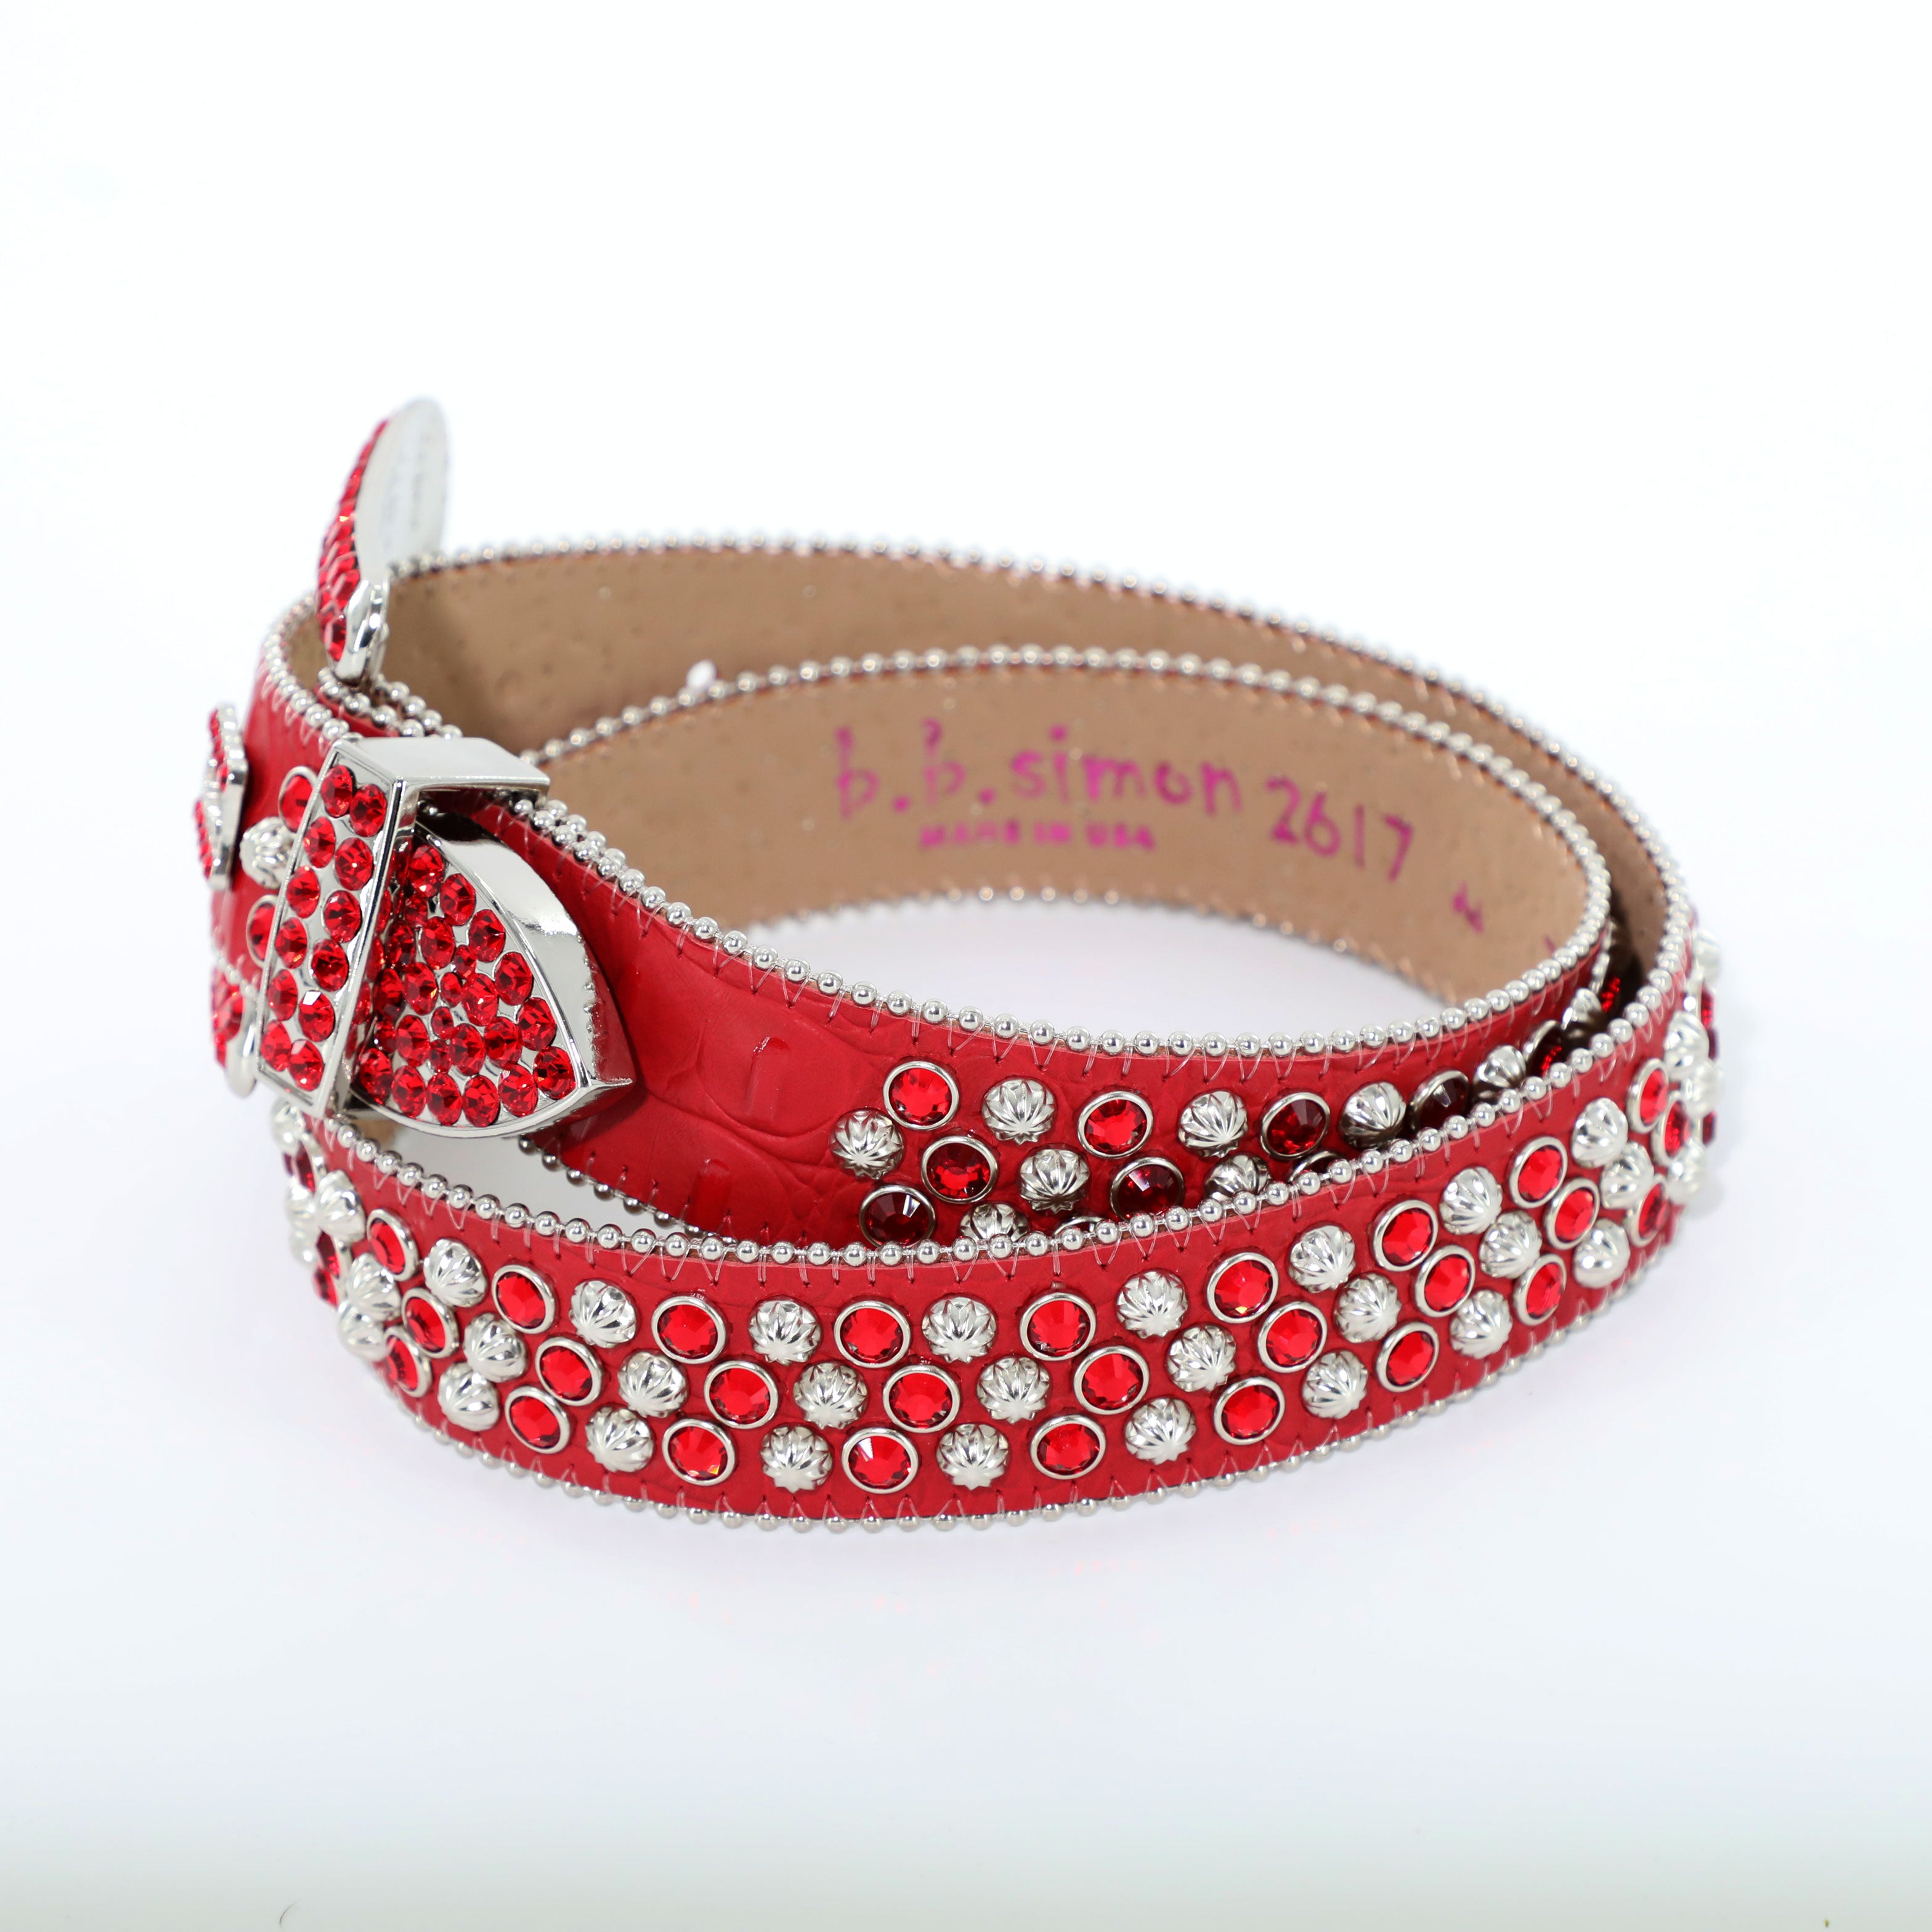 b.b Simon Red on Red size 34